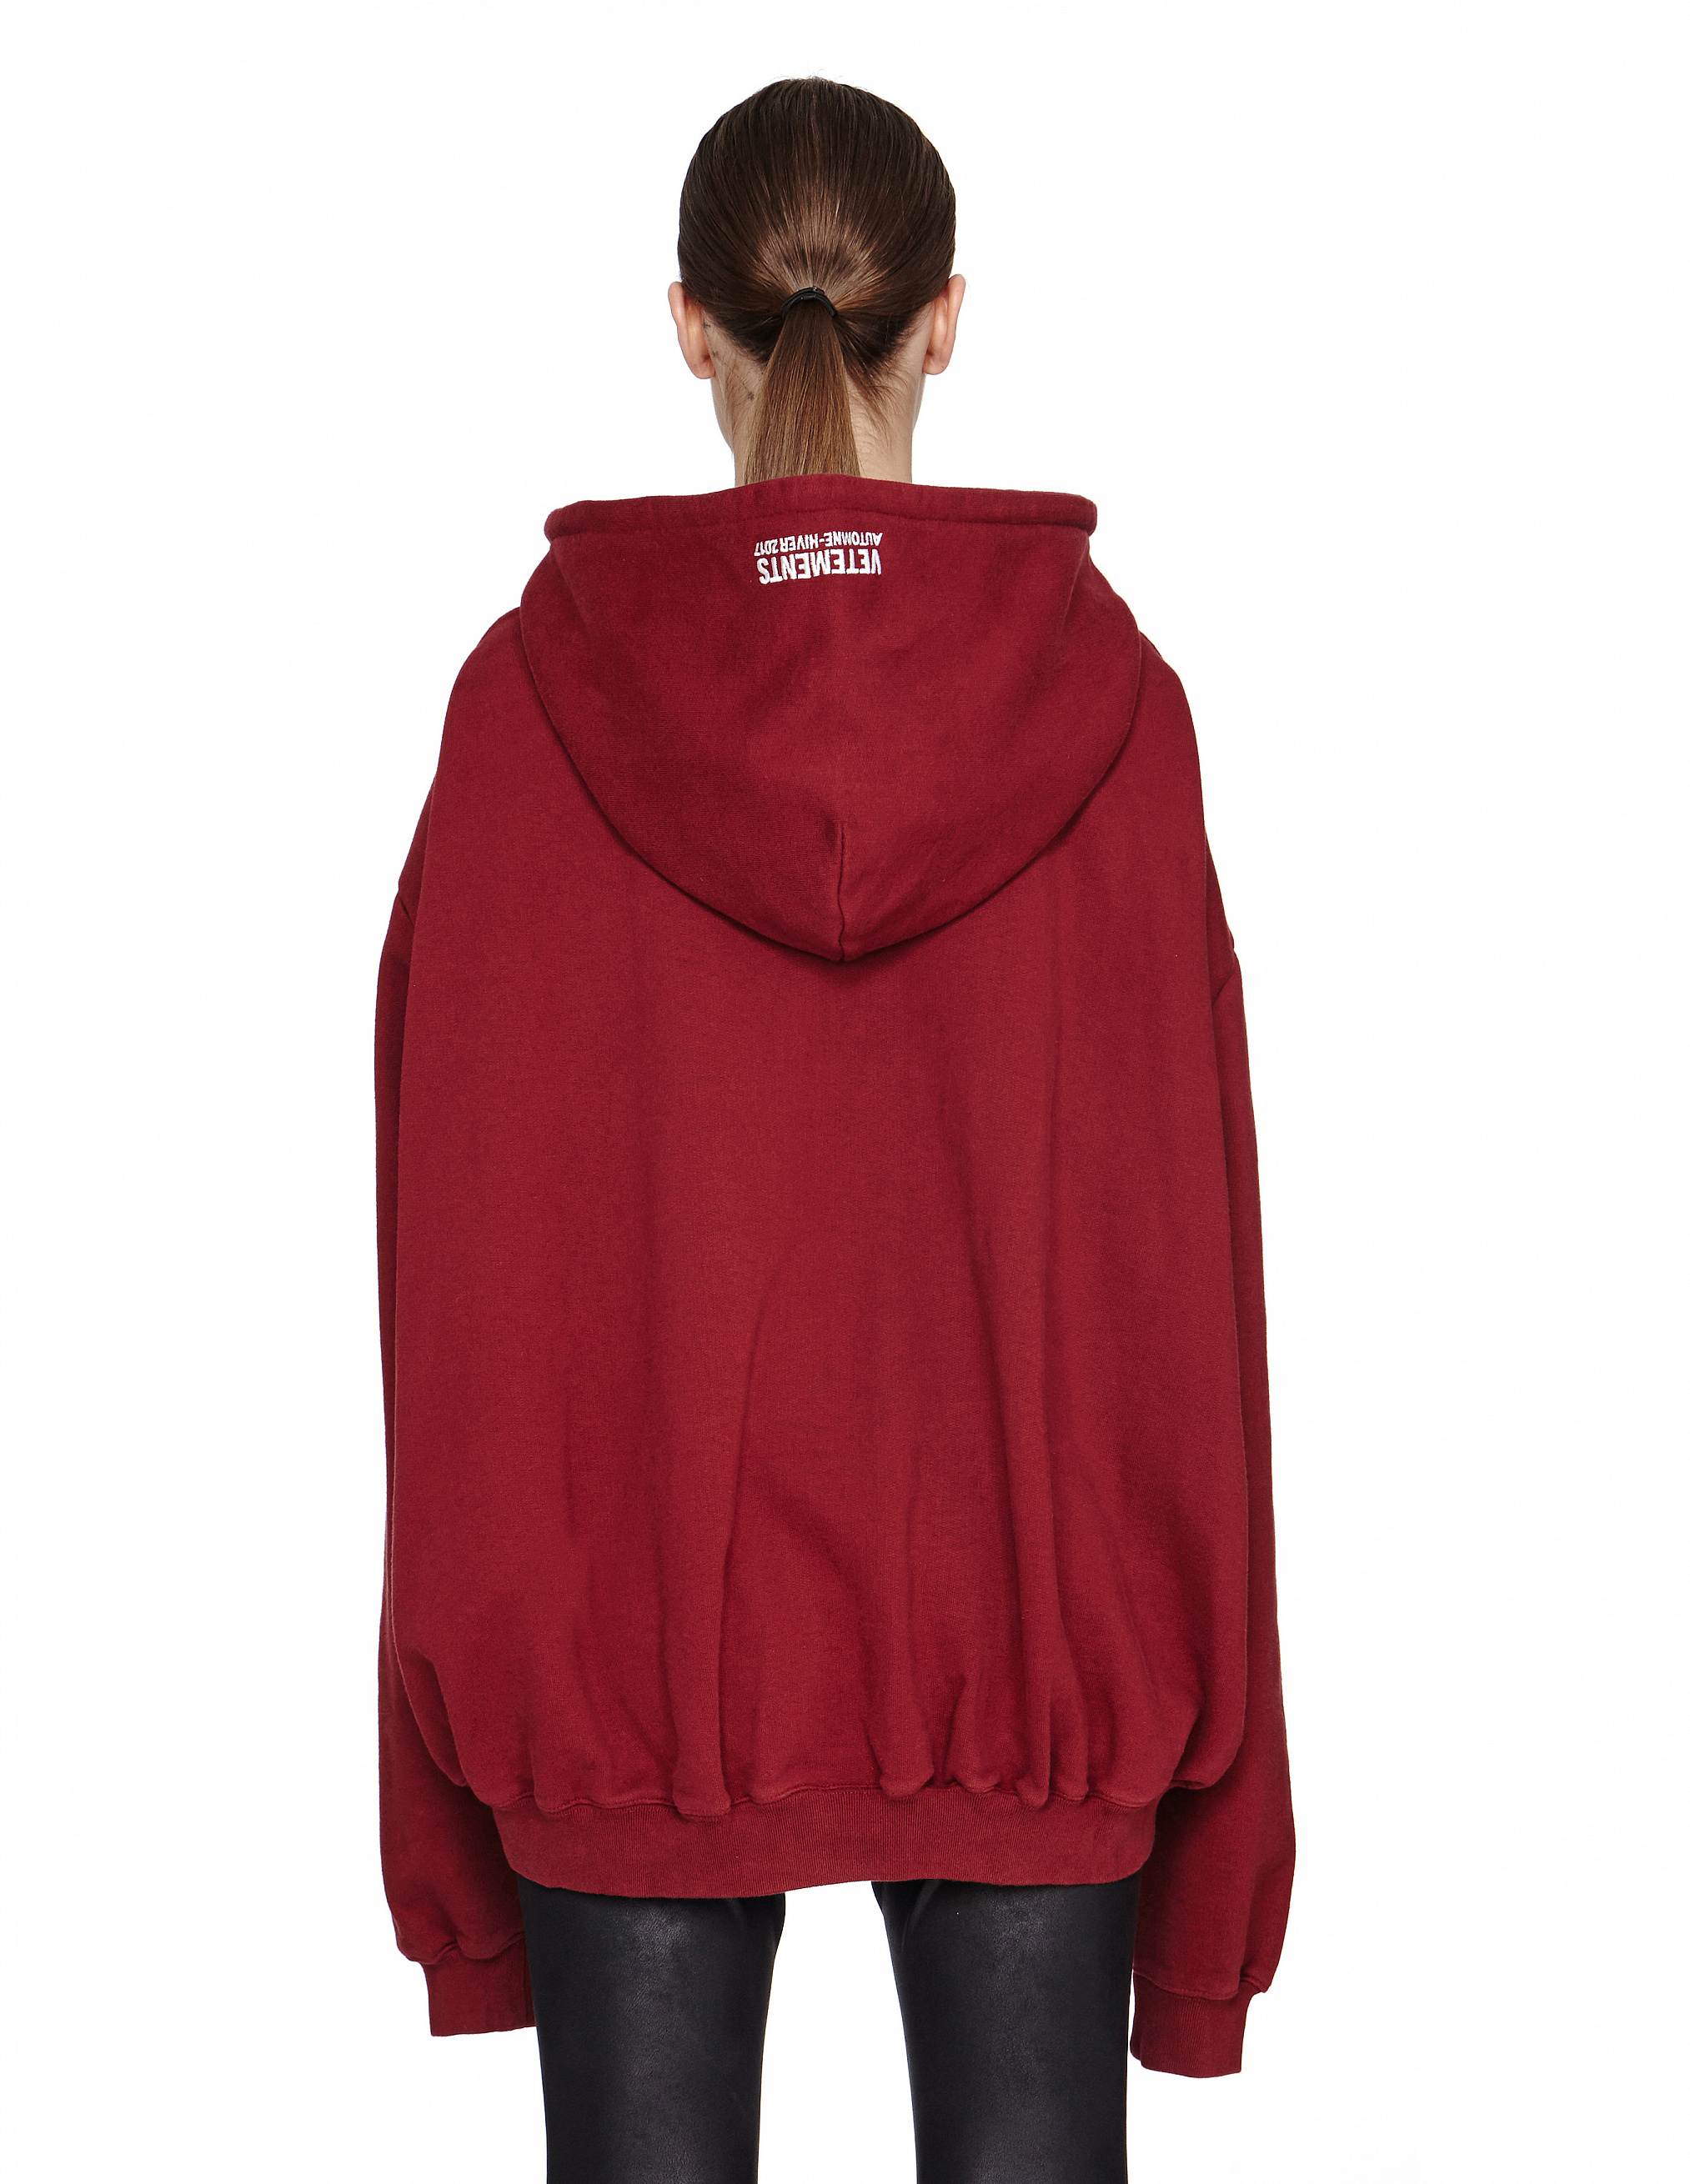 Cotton hoodie by Vetements — you can pre-order Demna Gvasalia FW'16